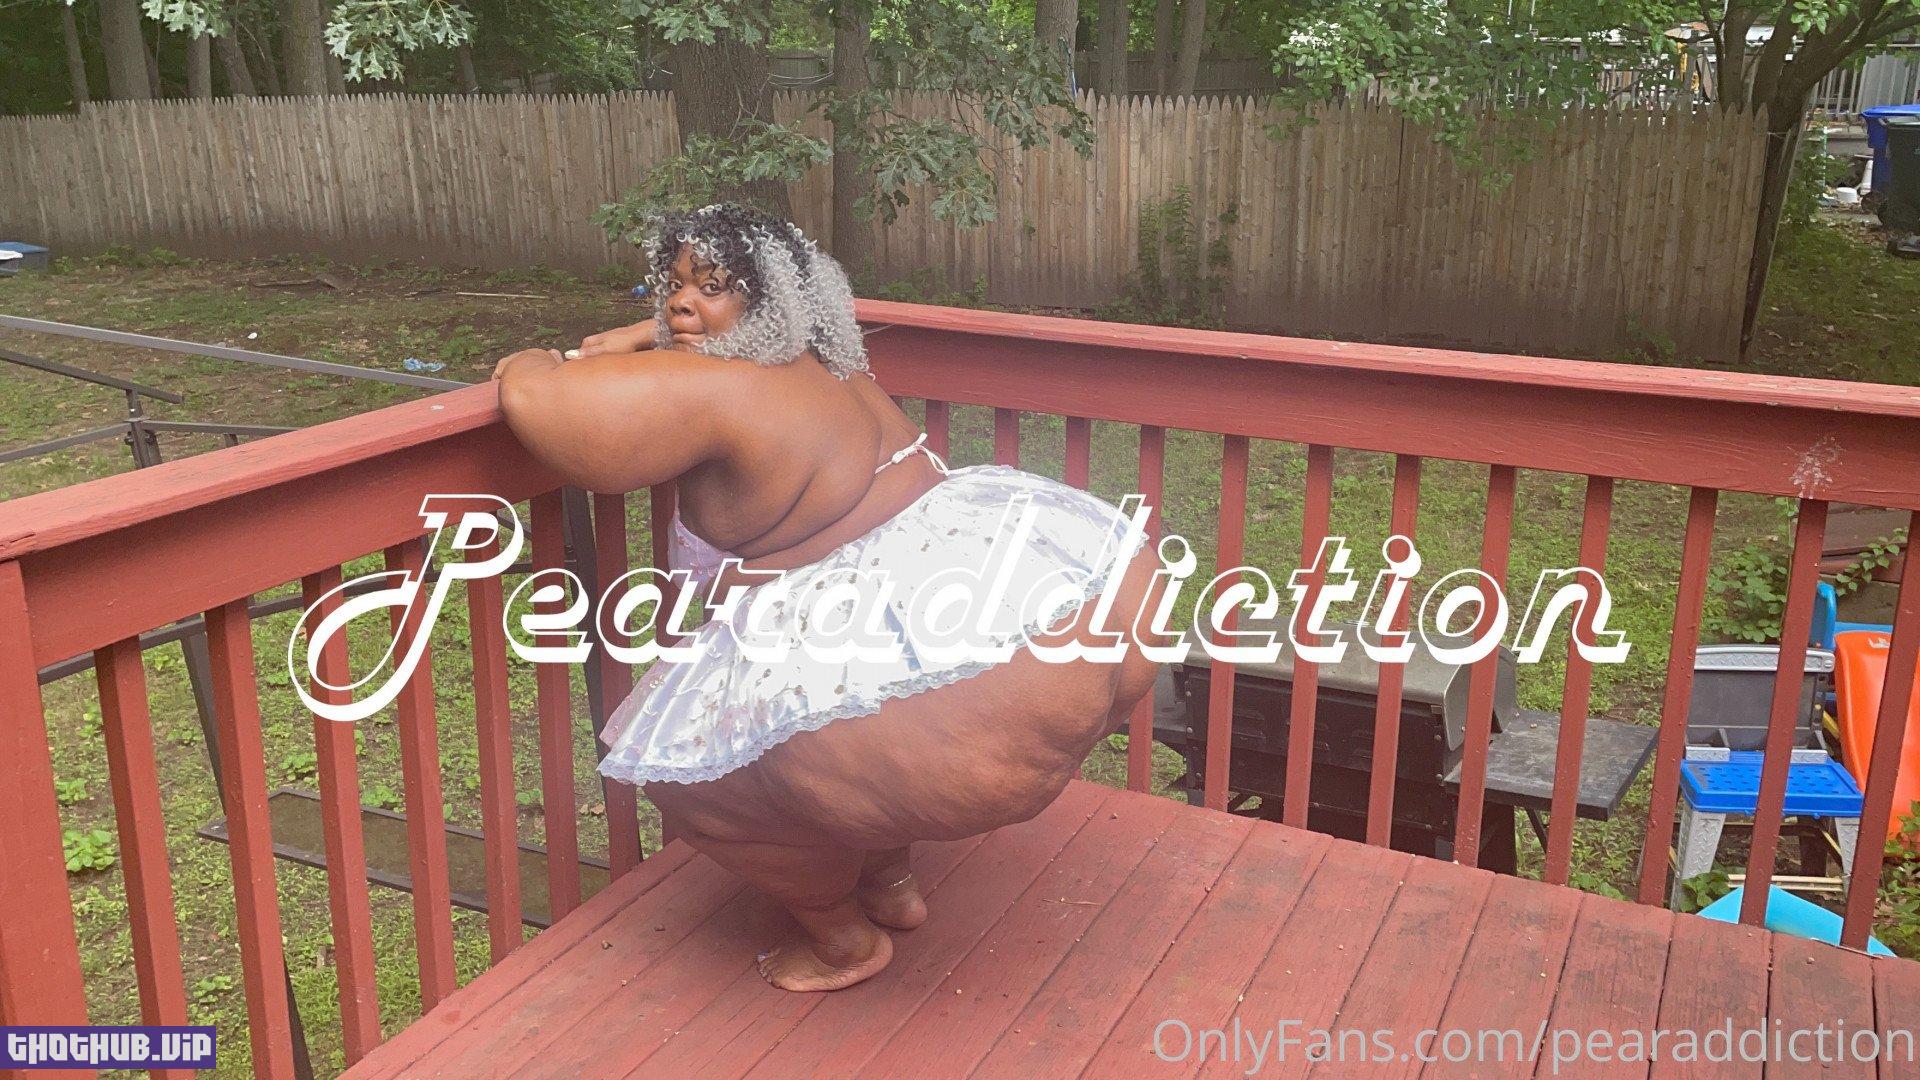 Pearaddiction (pearaddiction) Onlyfans Leaks (144 images)